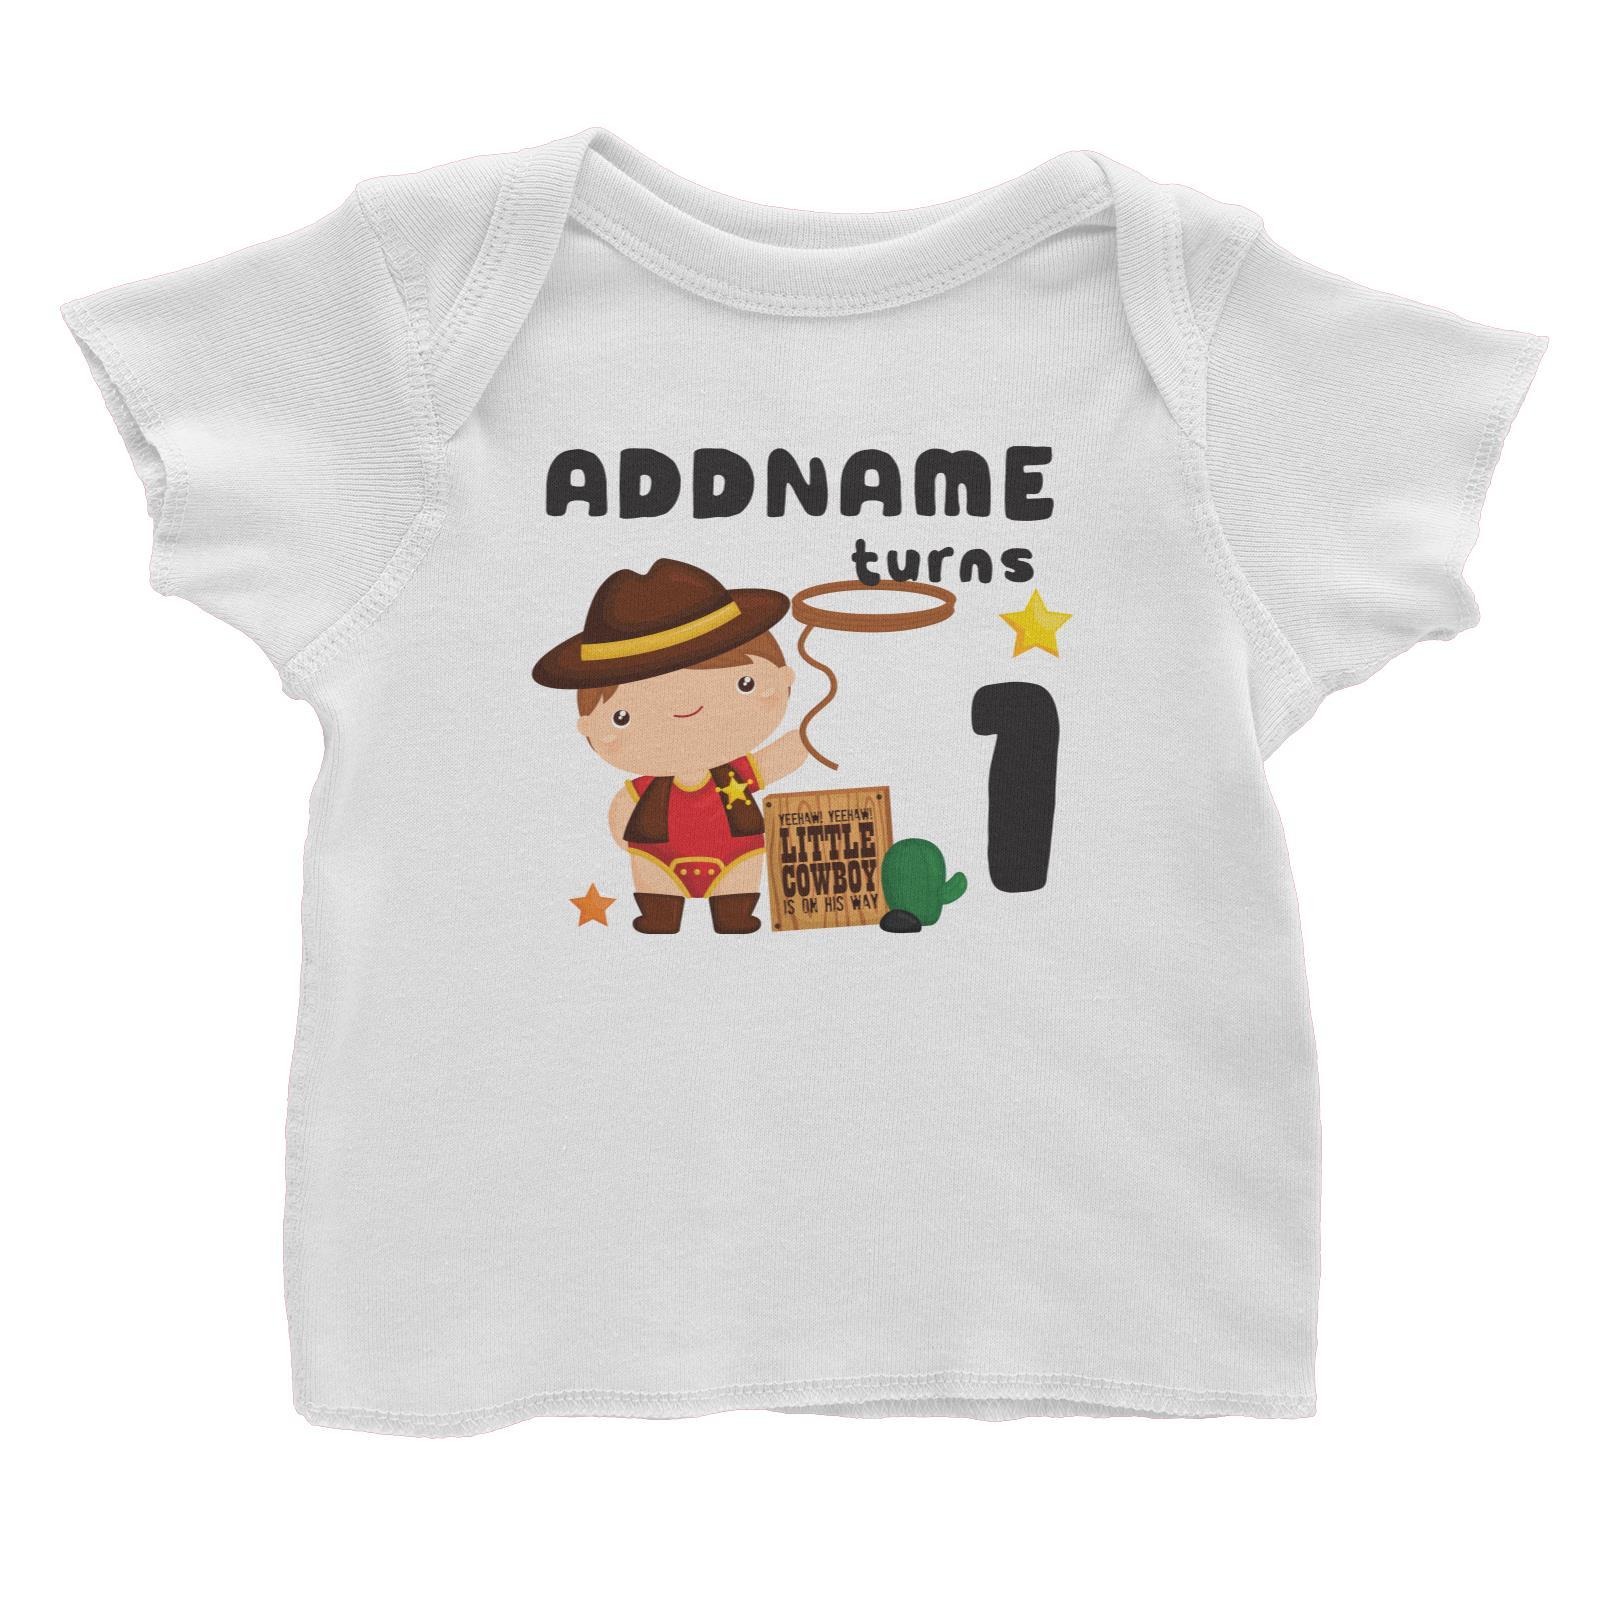 Birthday Cowboy Style Yeehaw Little Cowboy Is On His Way Addname Turns 1 Baby T-Shirt